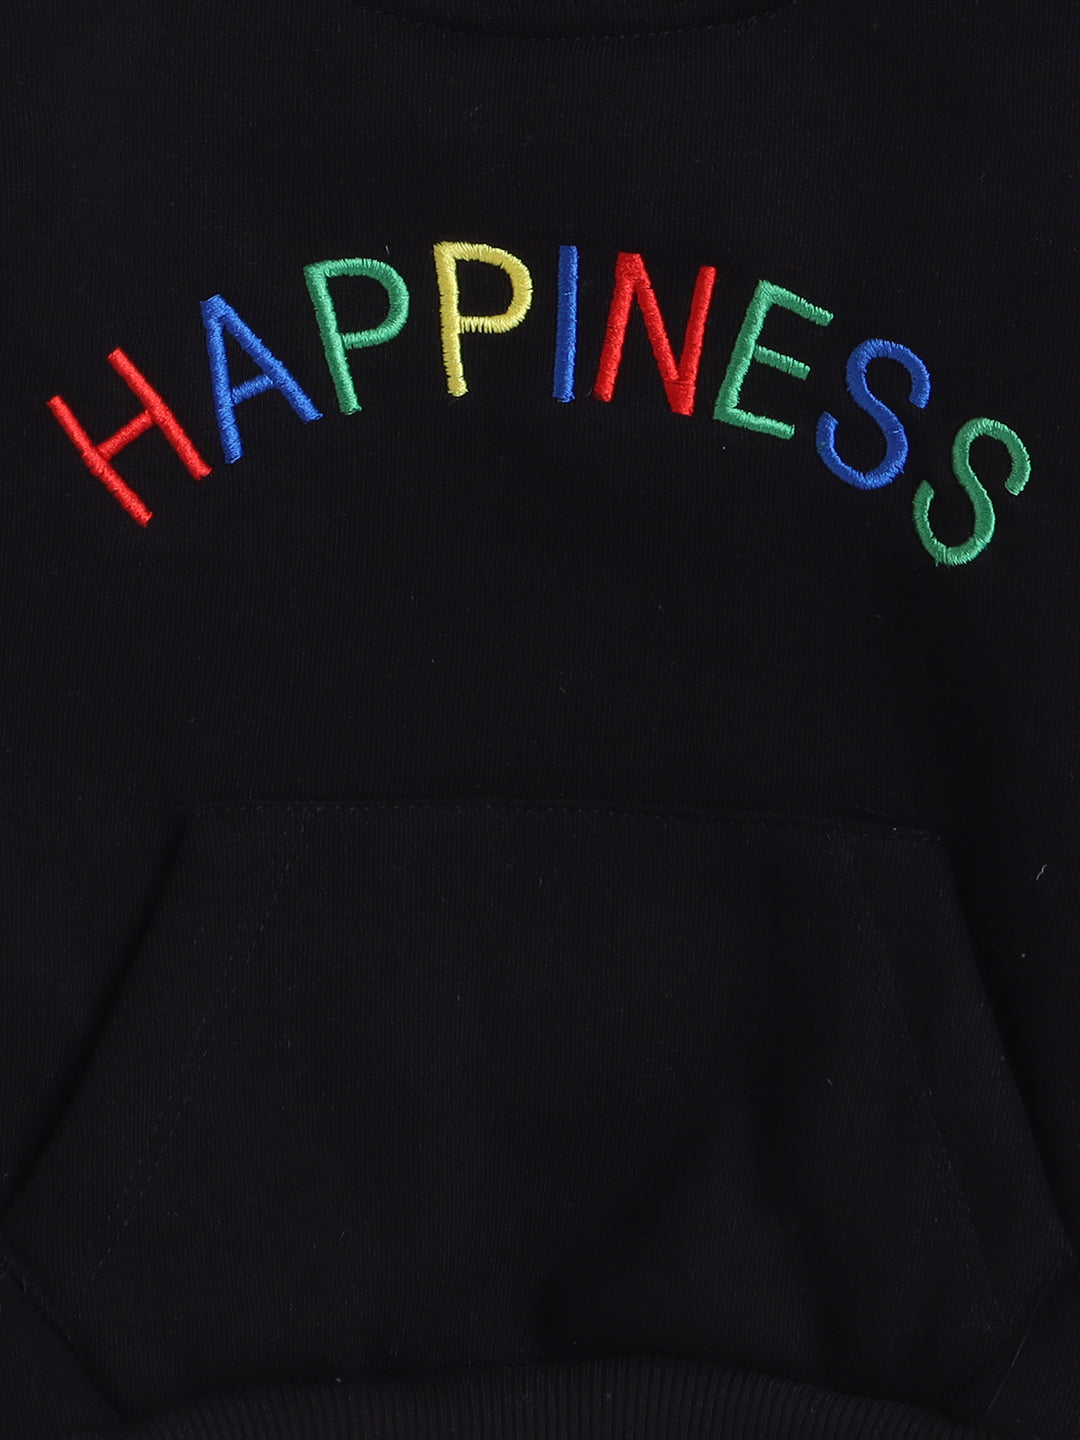 Knitting Doodles Kids' Sweat Shirt with Warm Fleece and Colourful Happiness Embroidery- Black